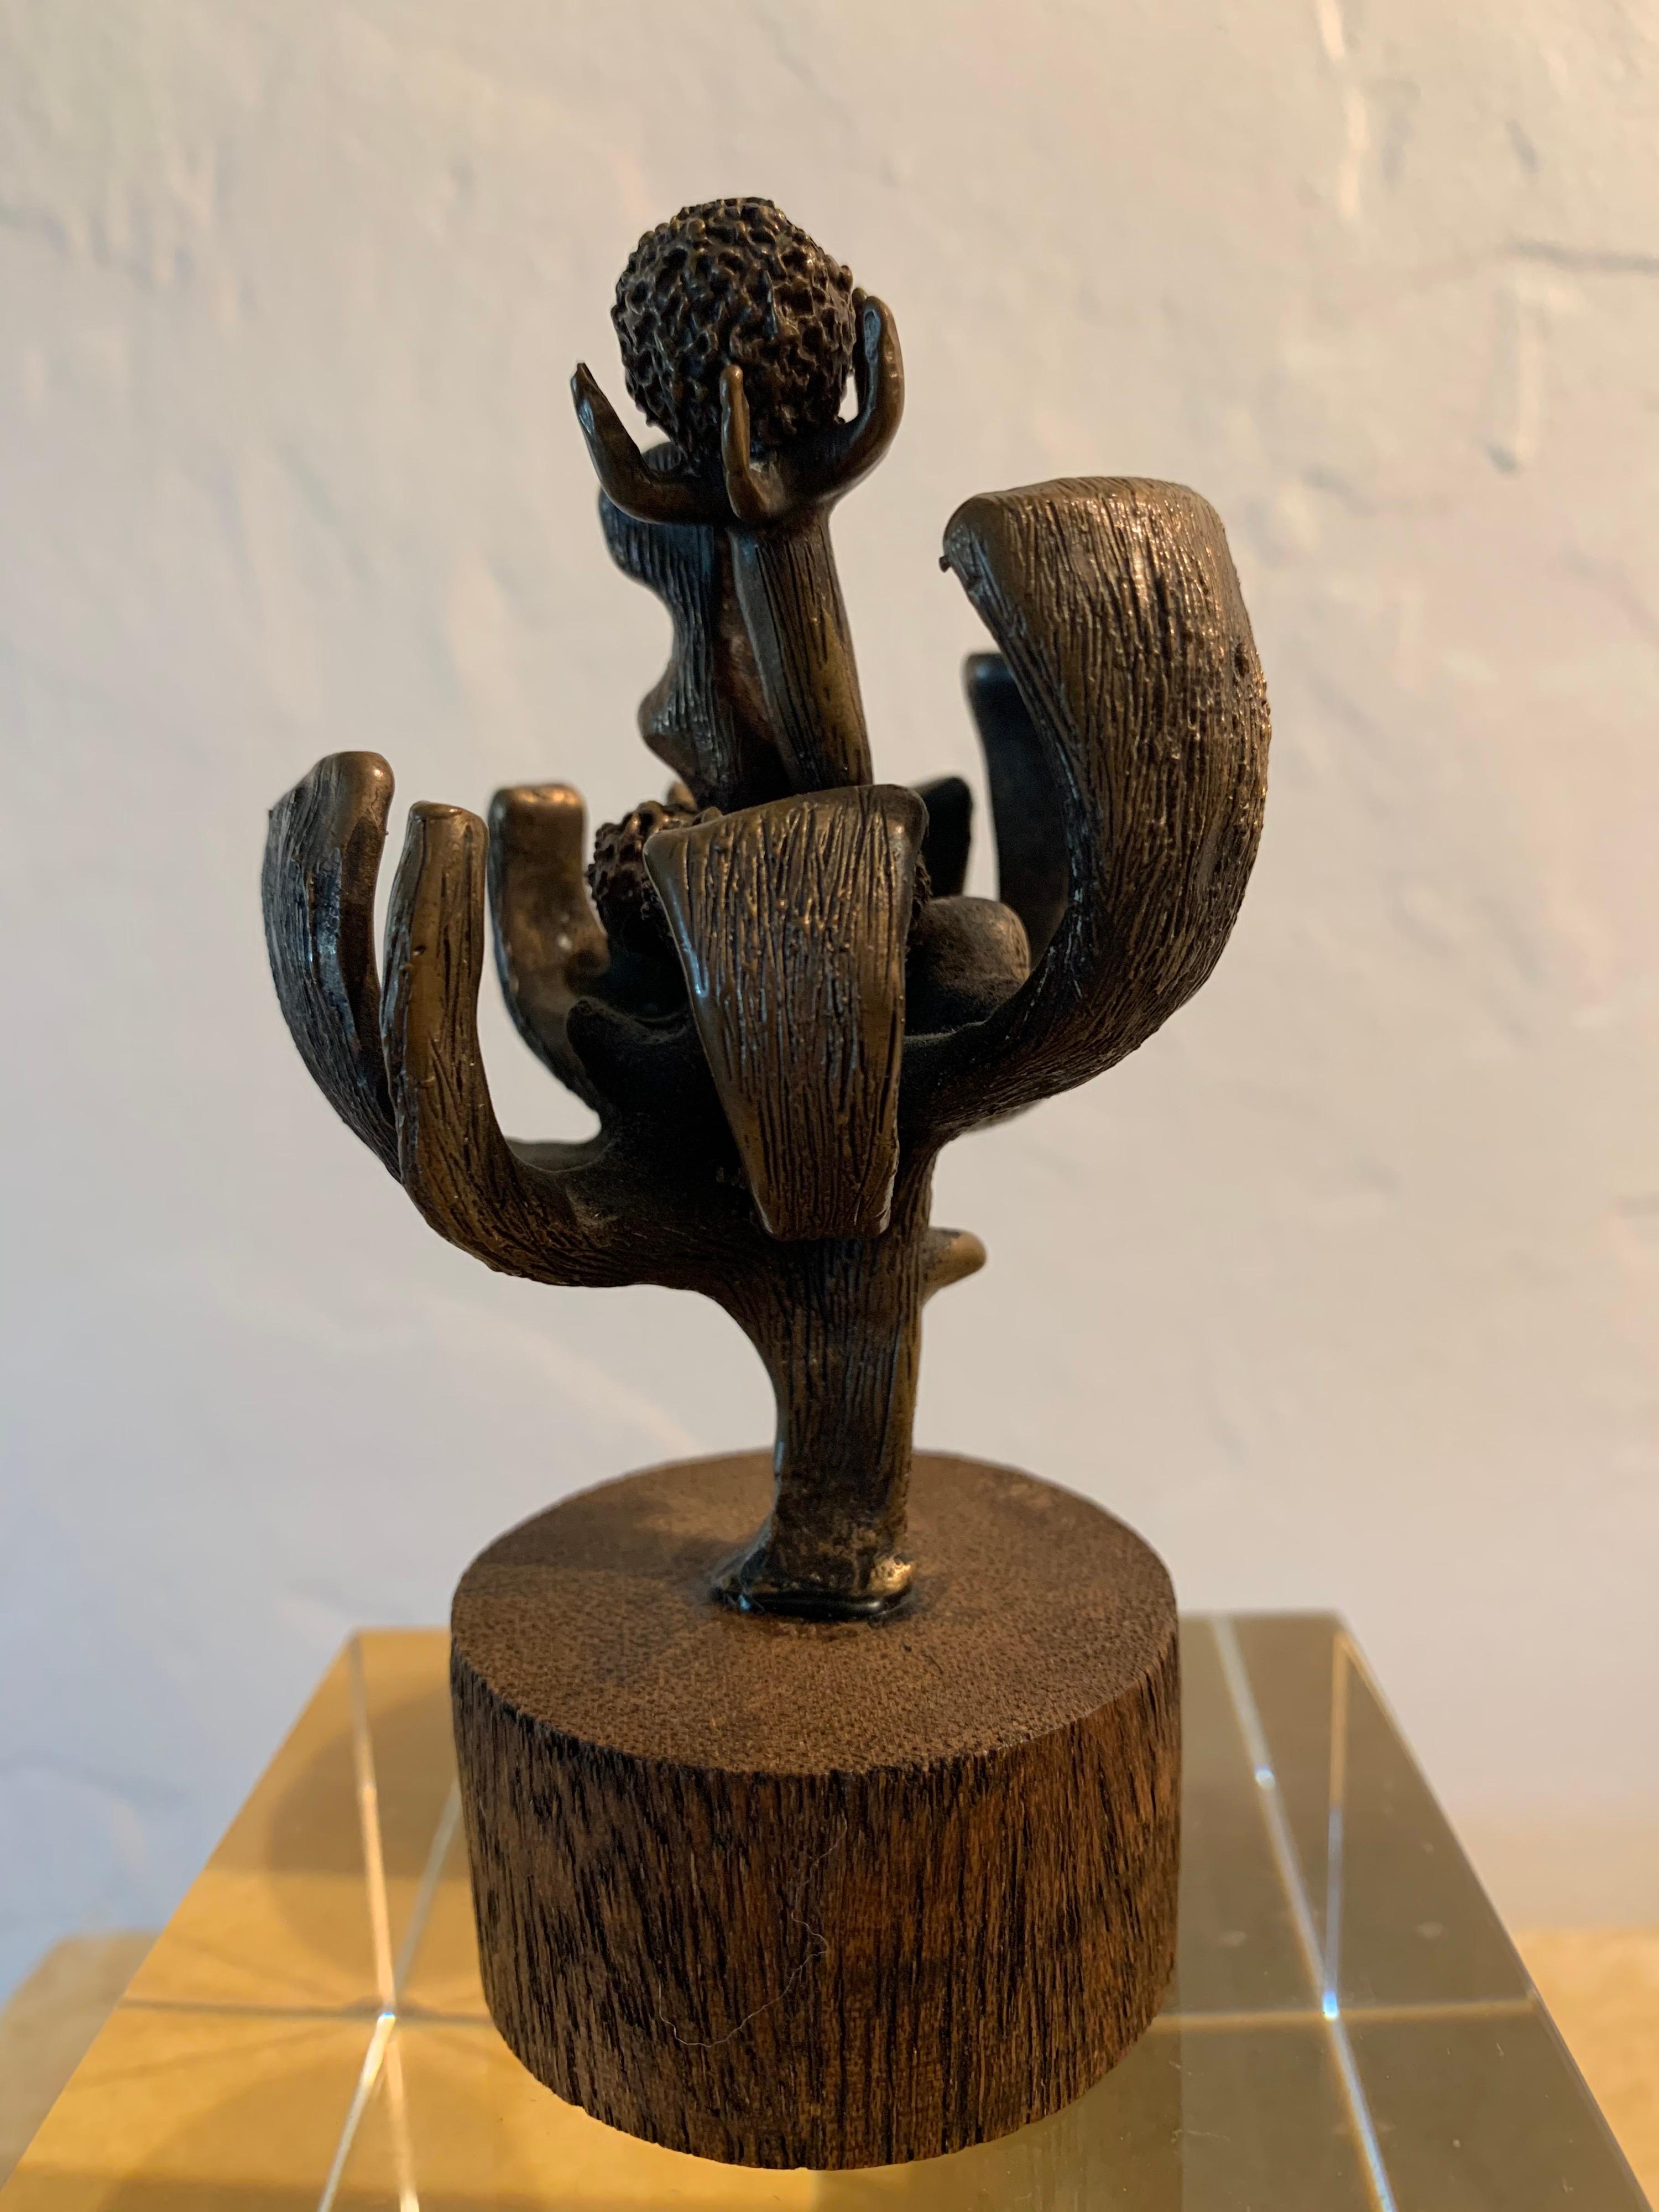 Set on solid zebrawood base, this unknown artist's sculpture can be used as paperweight or desk sculpture. Some markings on base of wood but we cannot determine who made this beauty - All vintage and heavy.